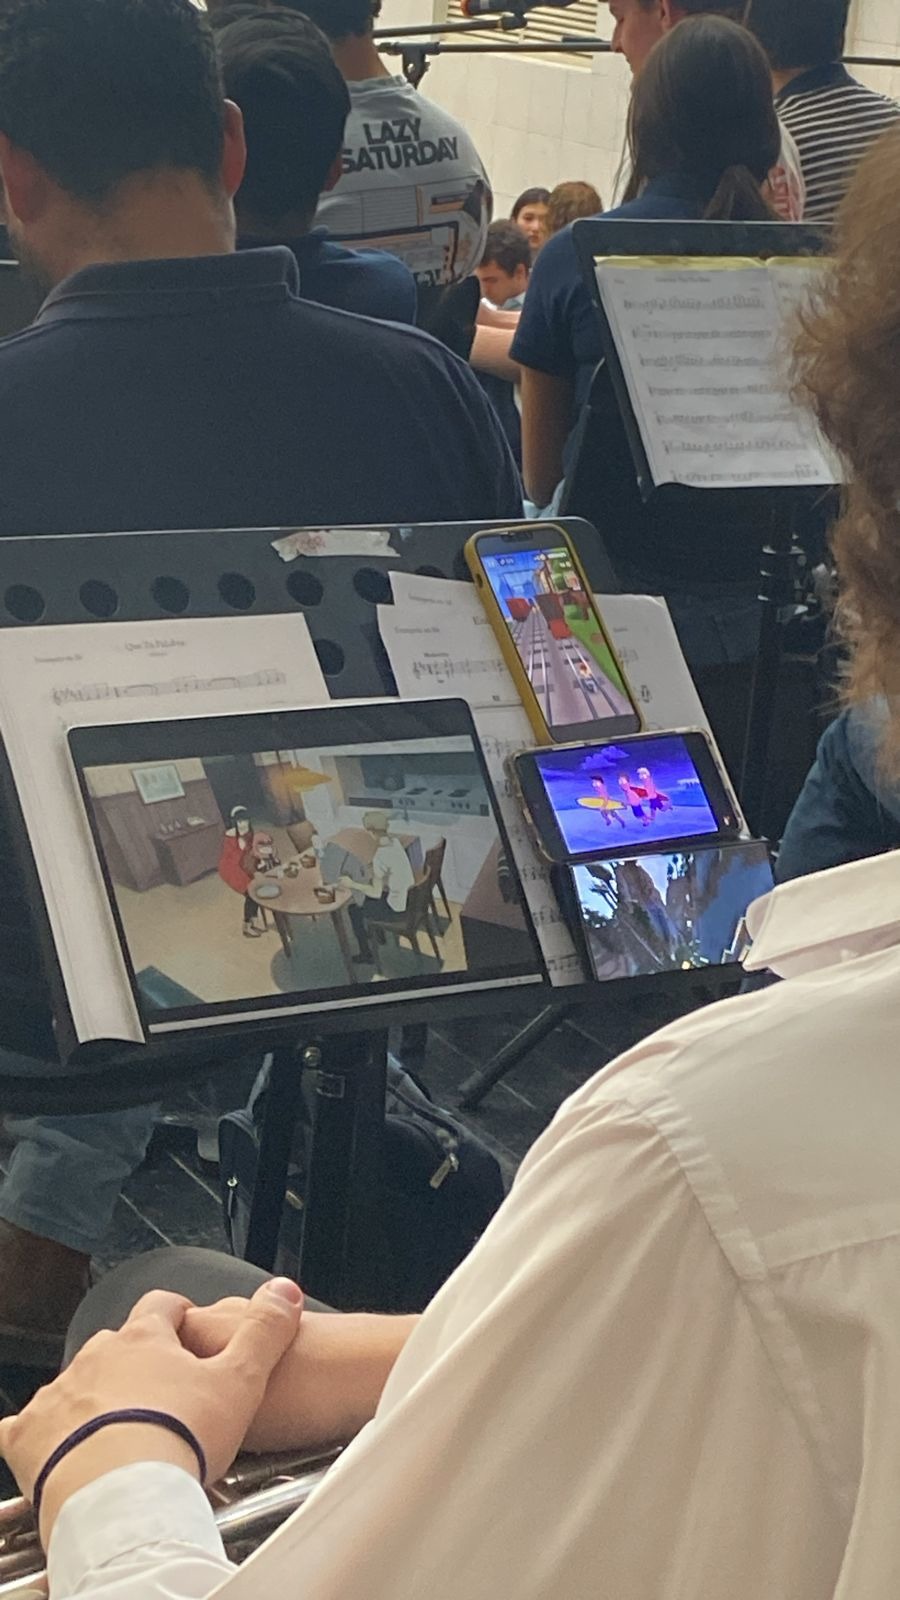 And that's what the trumpet section is doing while we play a mother's day mass (the one with the trumpet is our director btw he was just like bored or sum(I too am from trumpet section the picture was taken by the percussion guys)) - meme